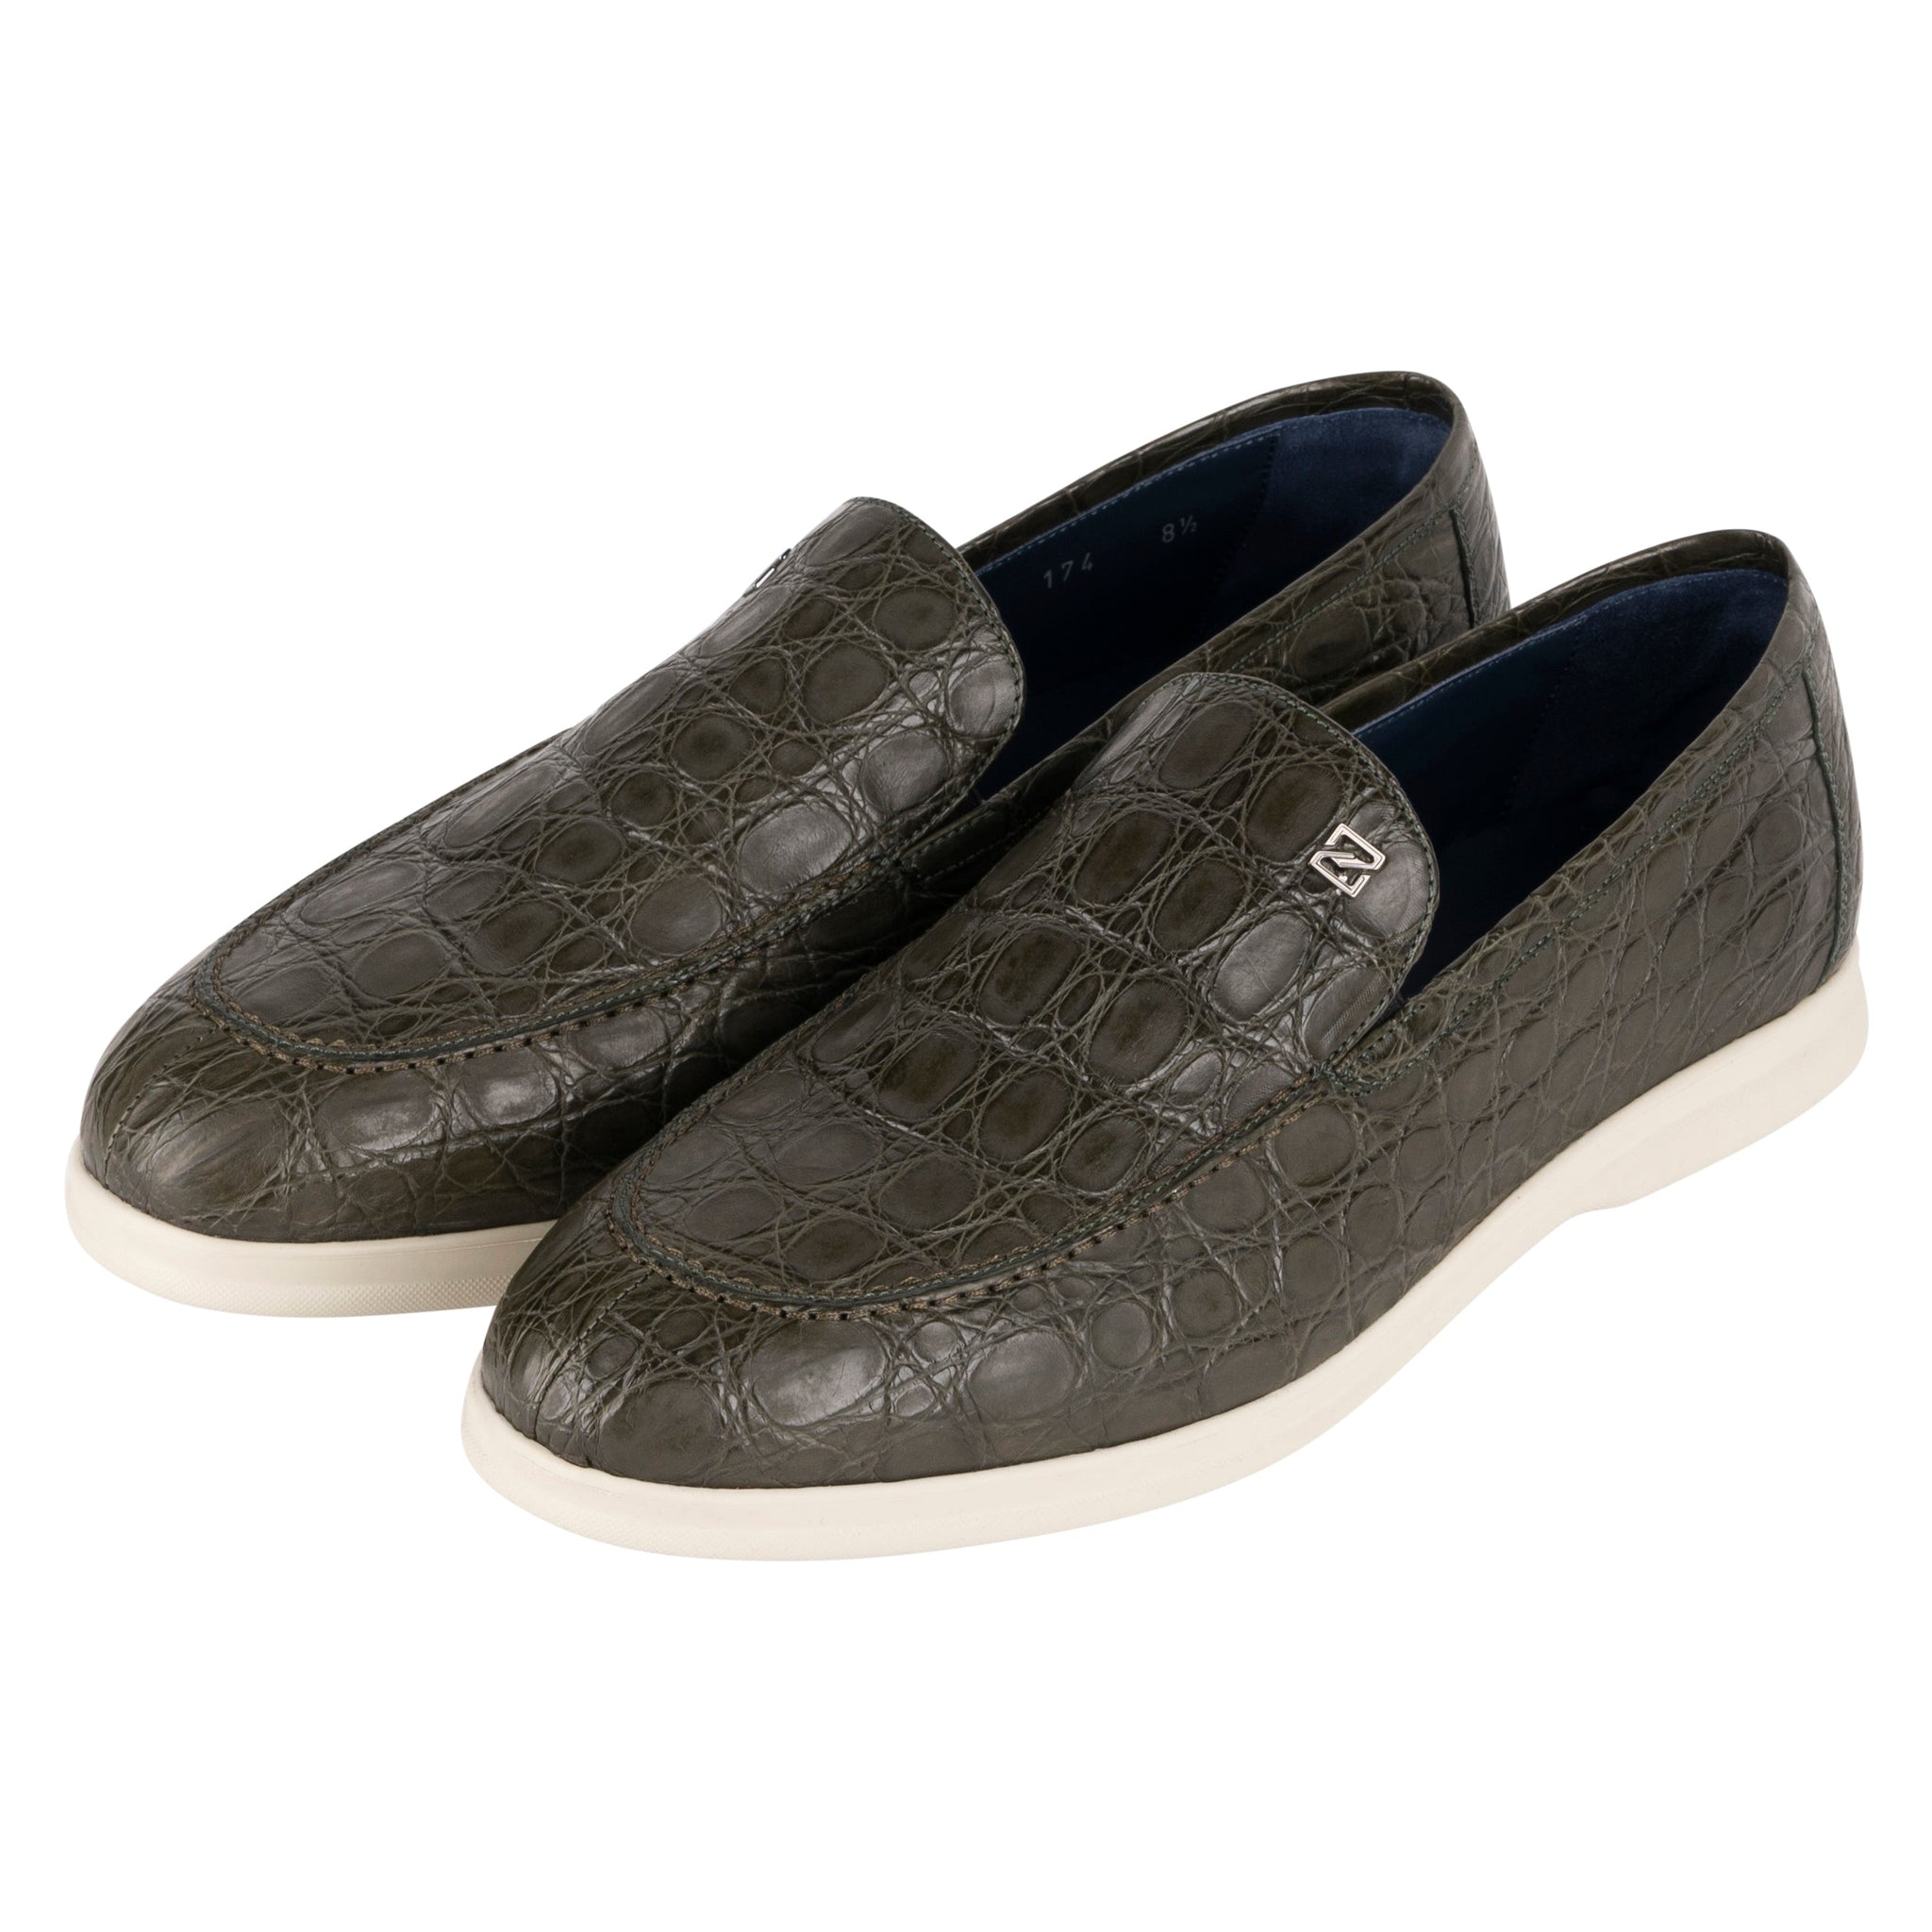 Caiman Loafers - ZILLI